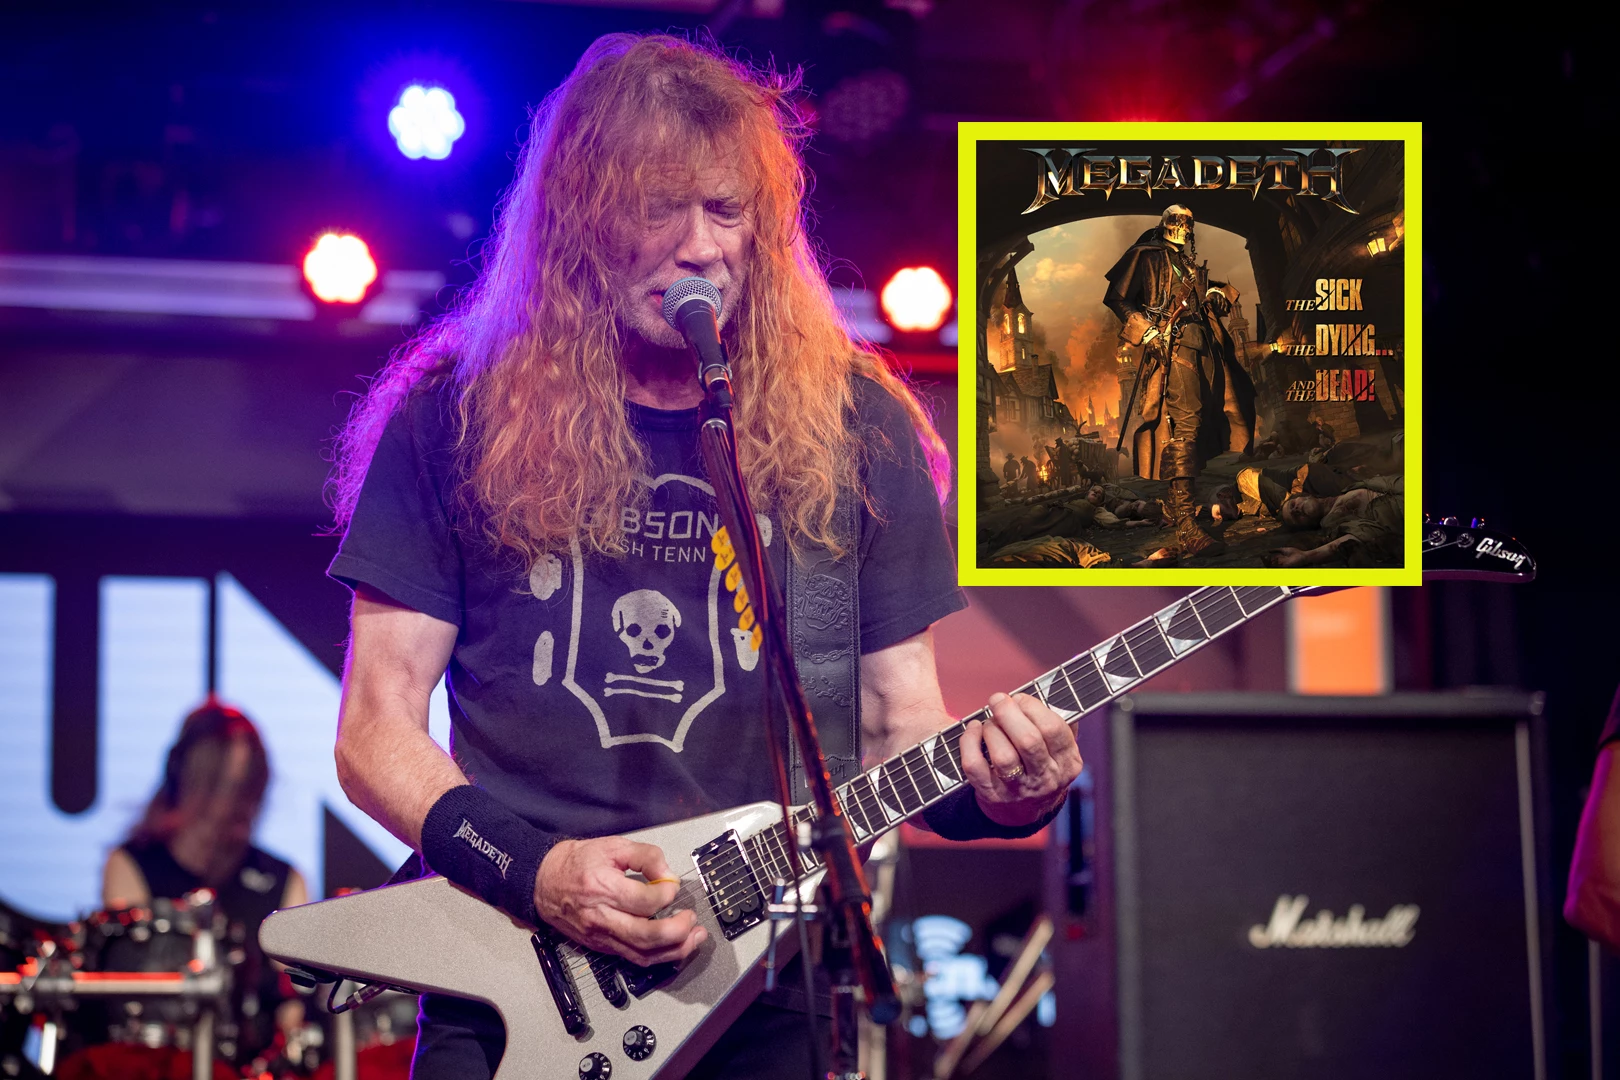 Megadeth - The Sick, The Dying… And The Dead!: Chapter III 